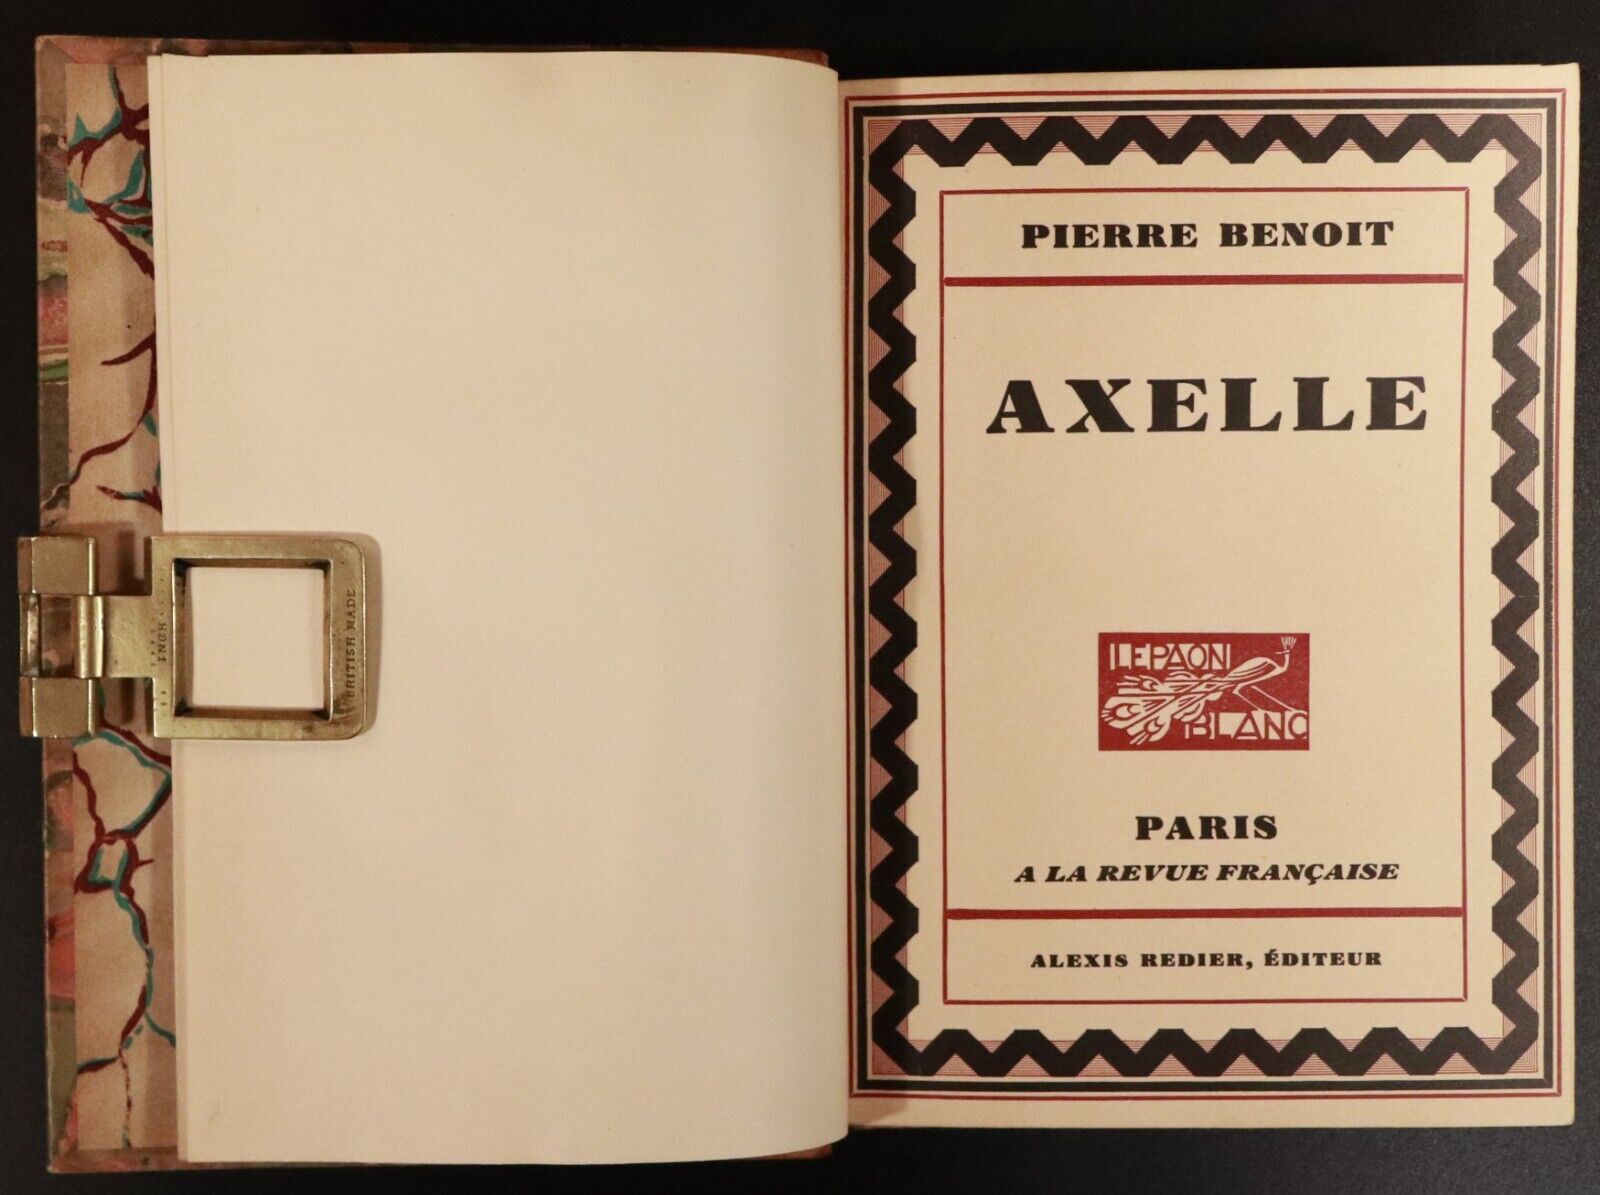 c1932 Axelle by Pierre Benoit Ltd Edition French Fiction Book Fine Binding - 0